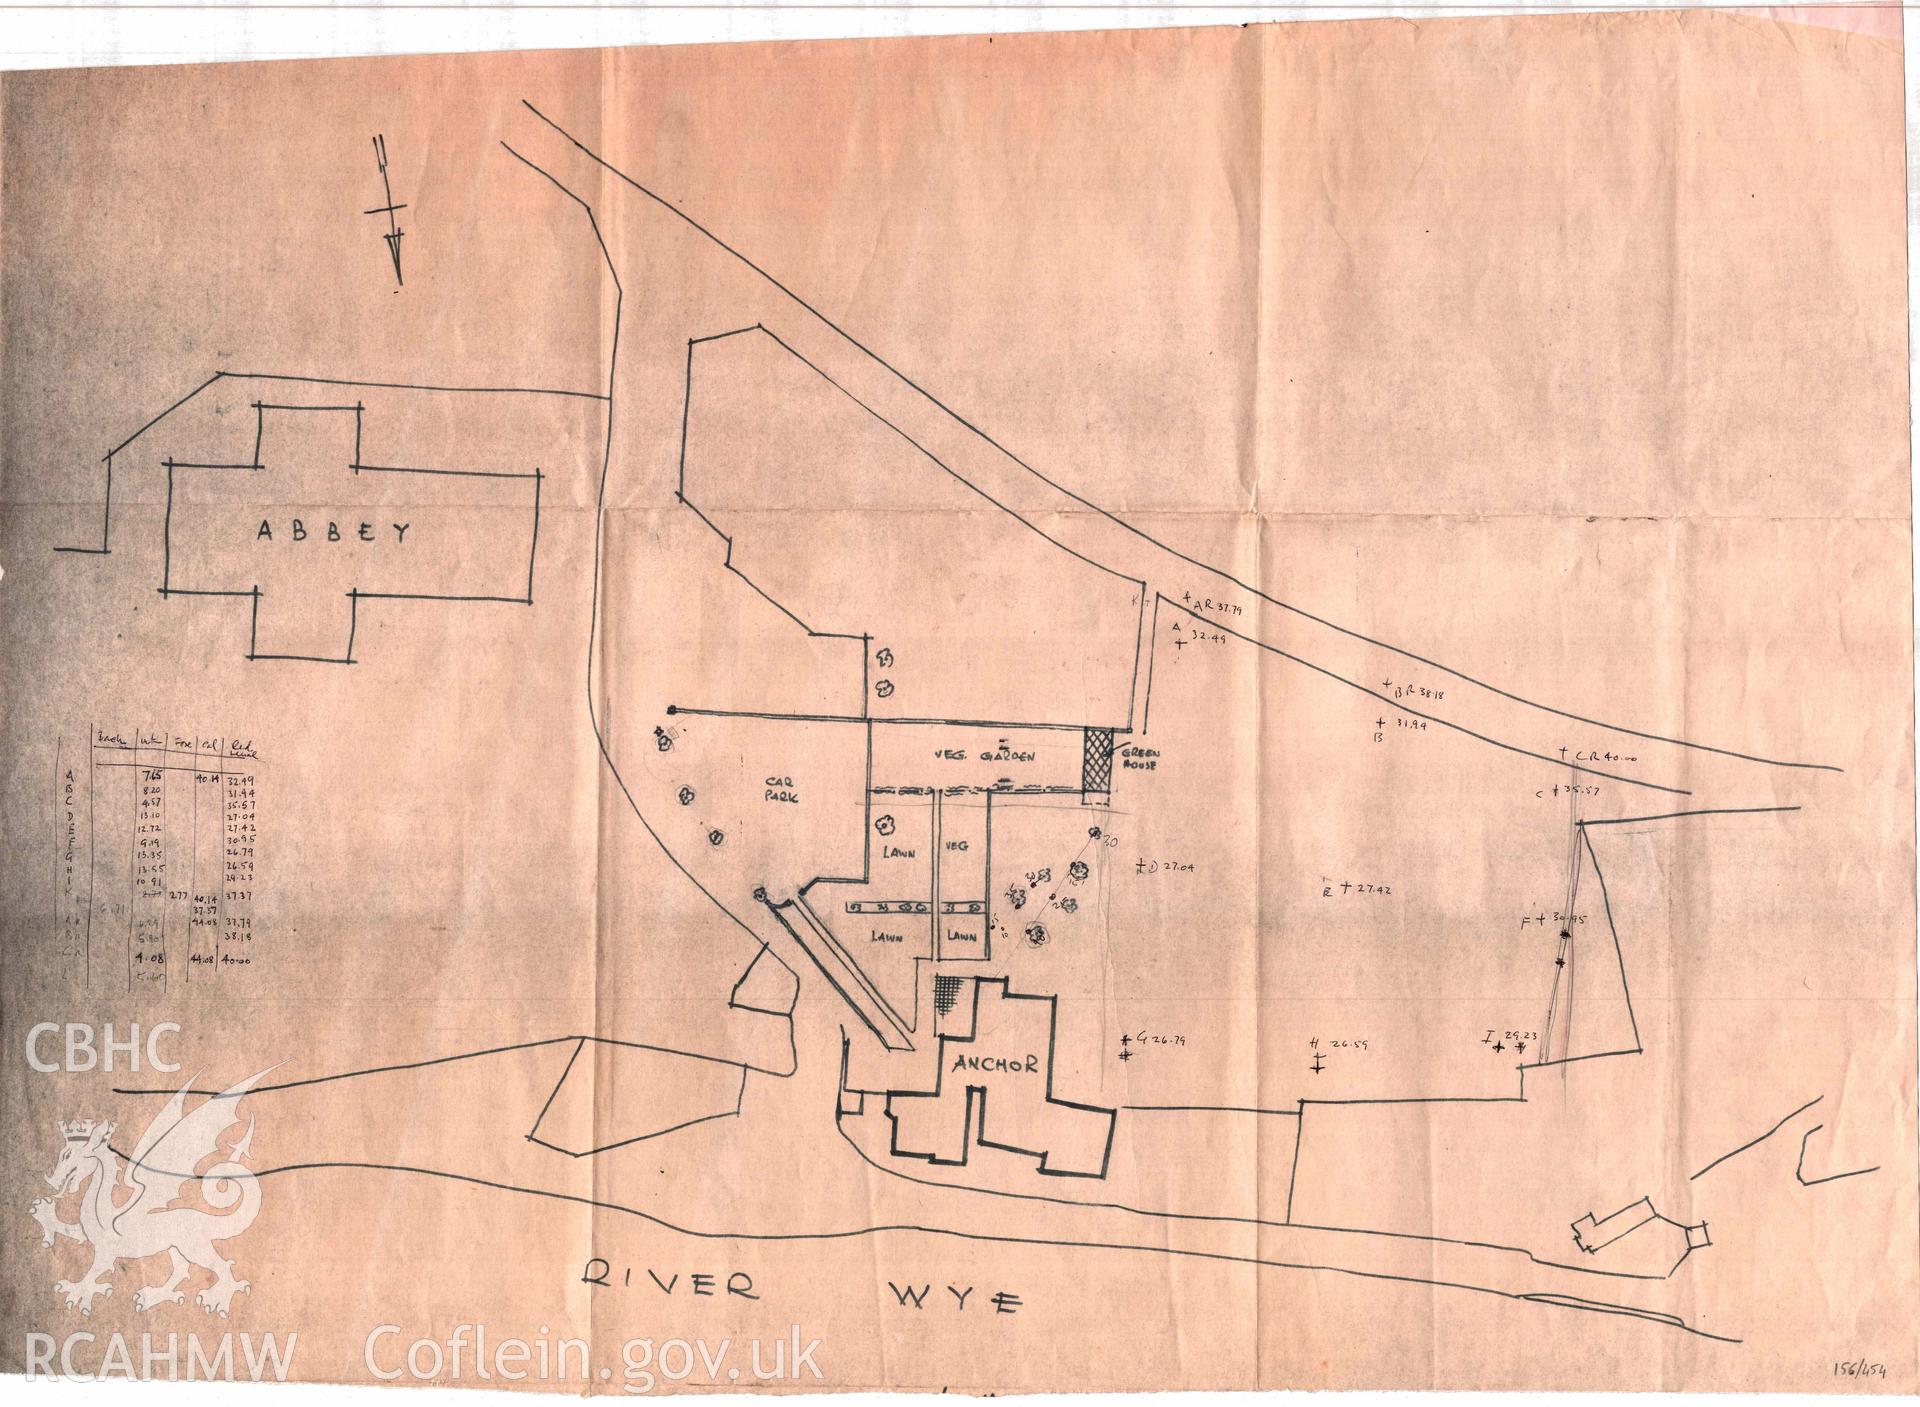 Cadw Guardianship monument drawing, outline of abbey, car park and adjacent buildings, Tintern Abbey. Undated